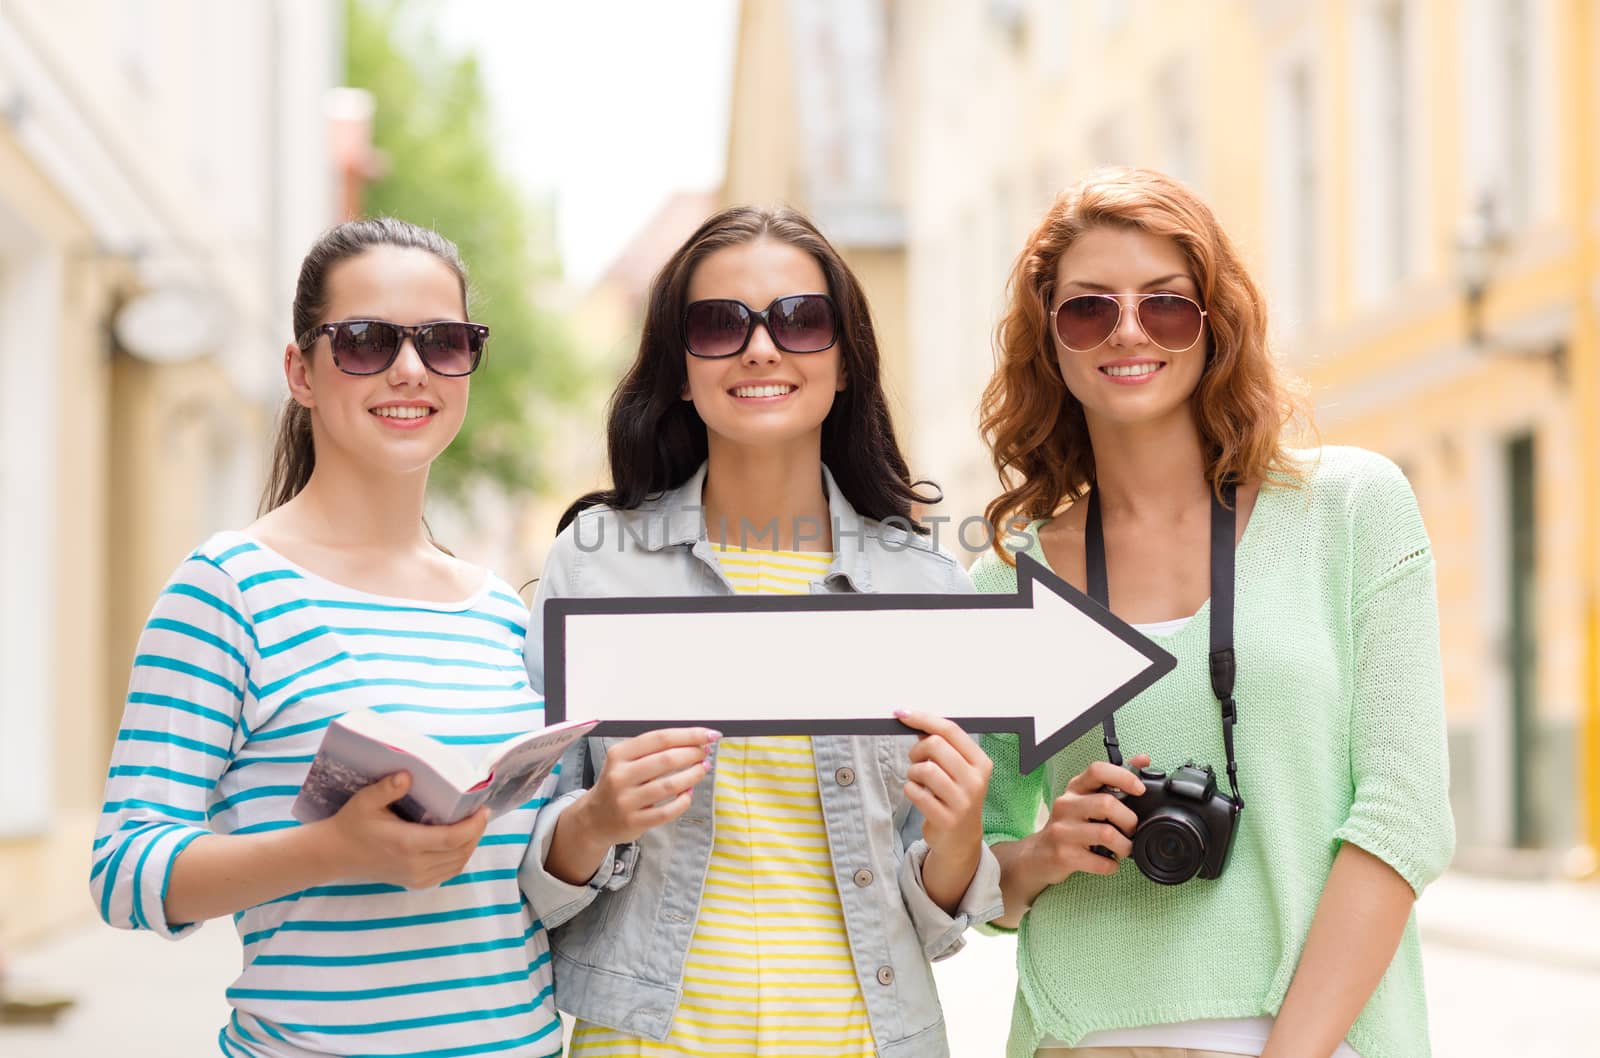 tourism, travel, vacation, direction and friendship concept - smiling teenage girls with white arrow showing direction outdoors